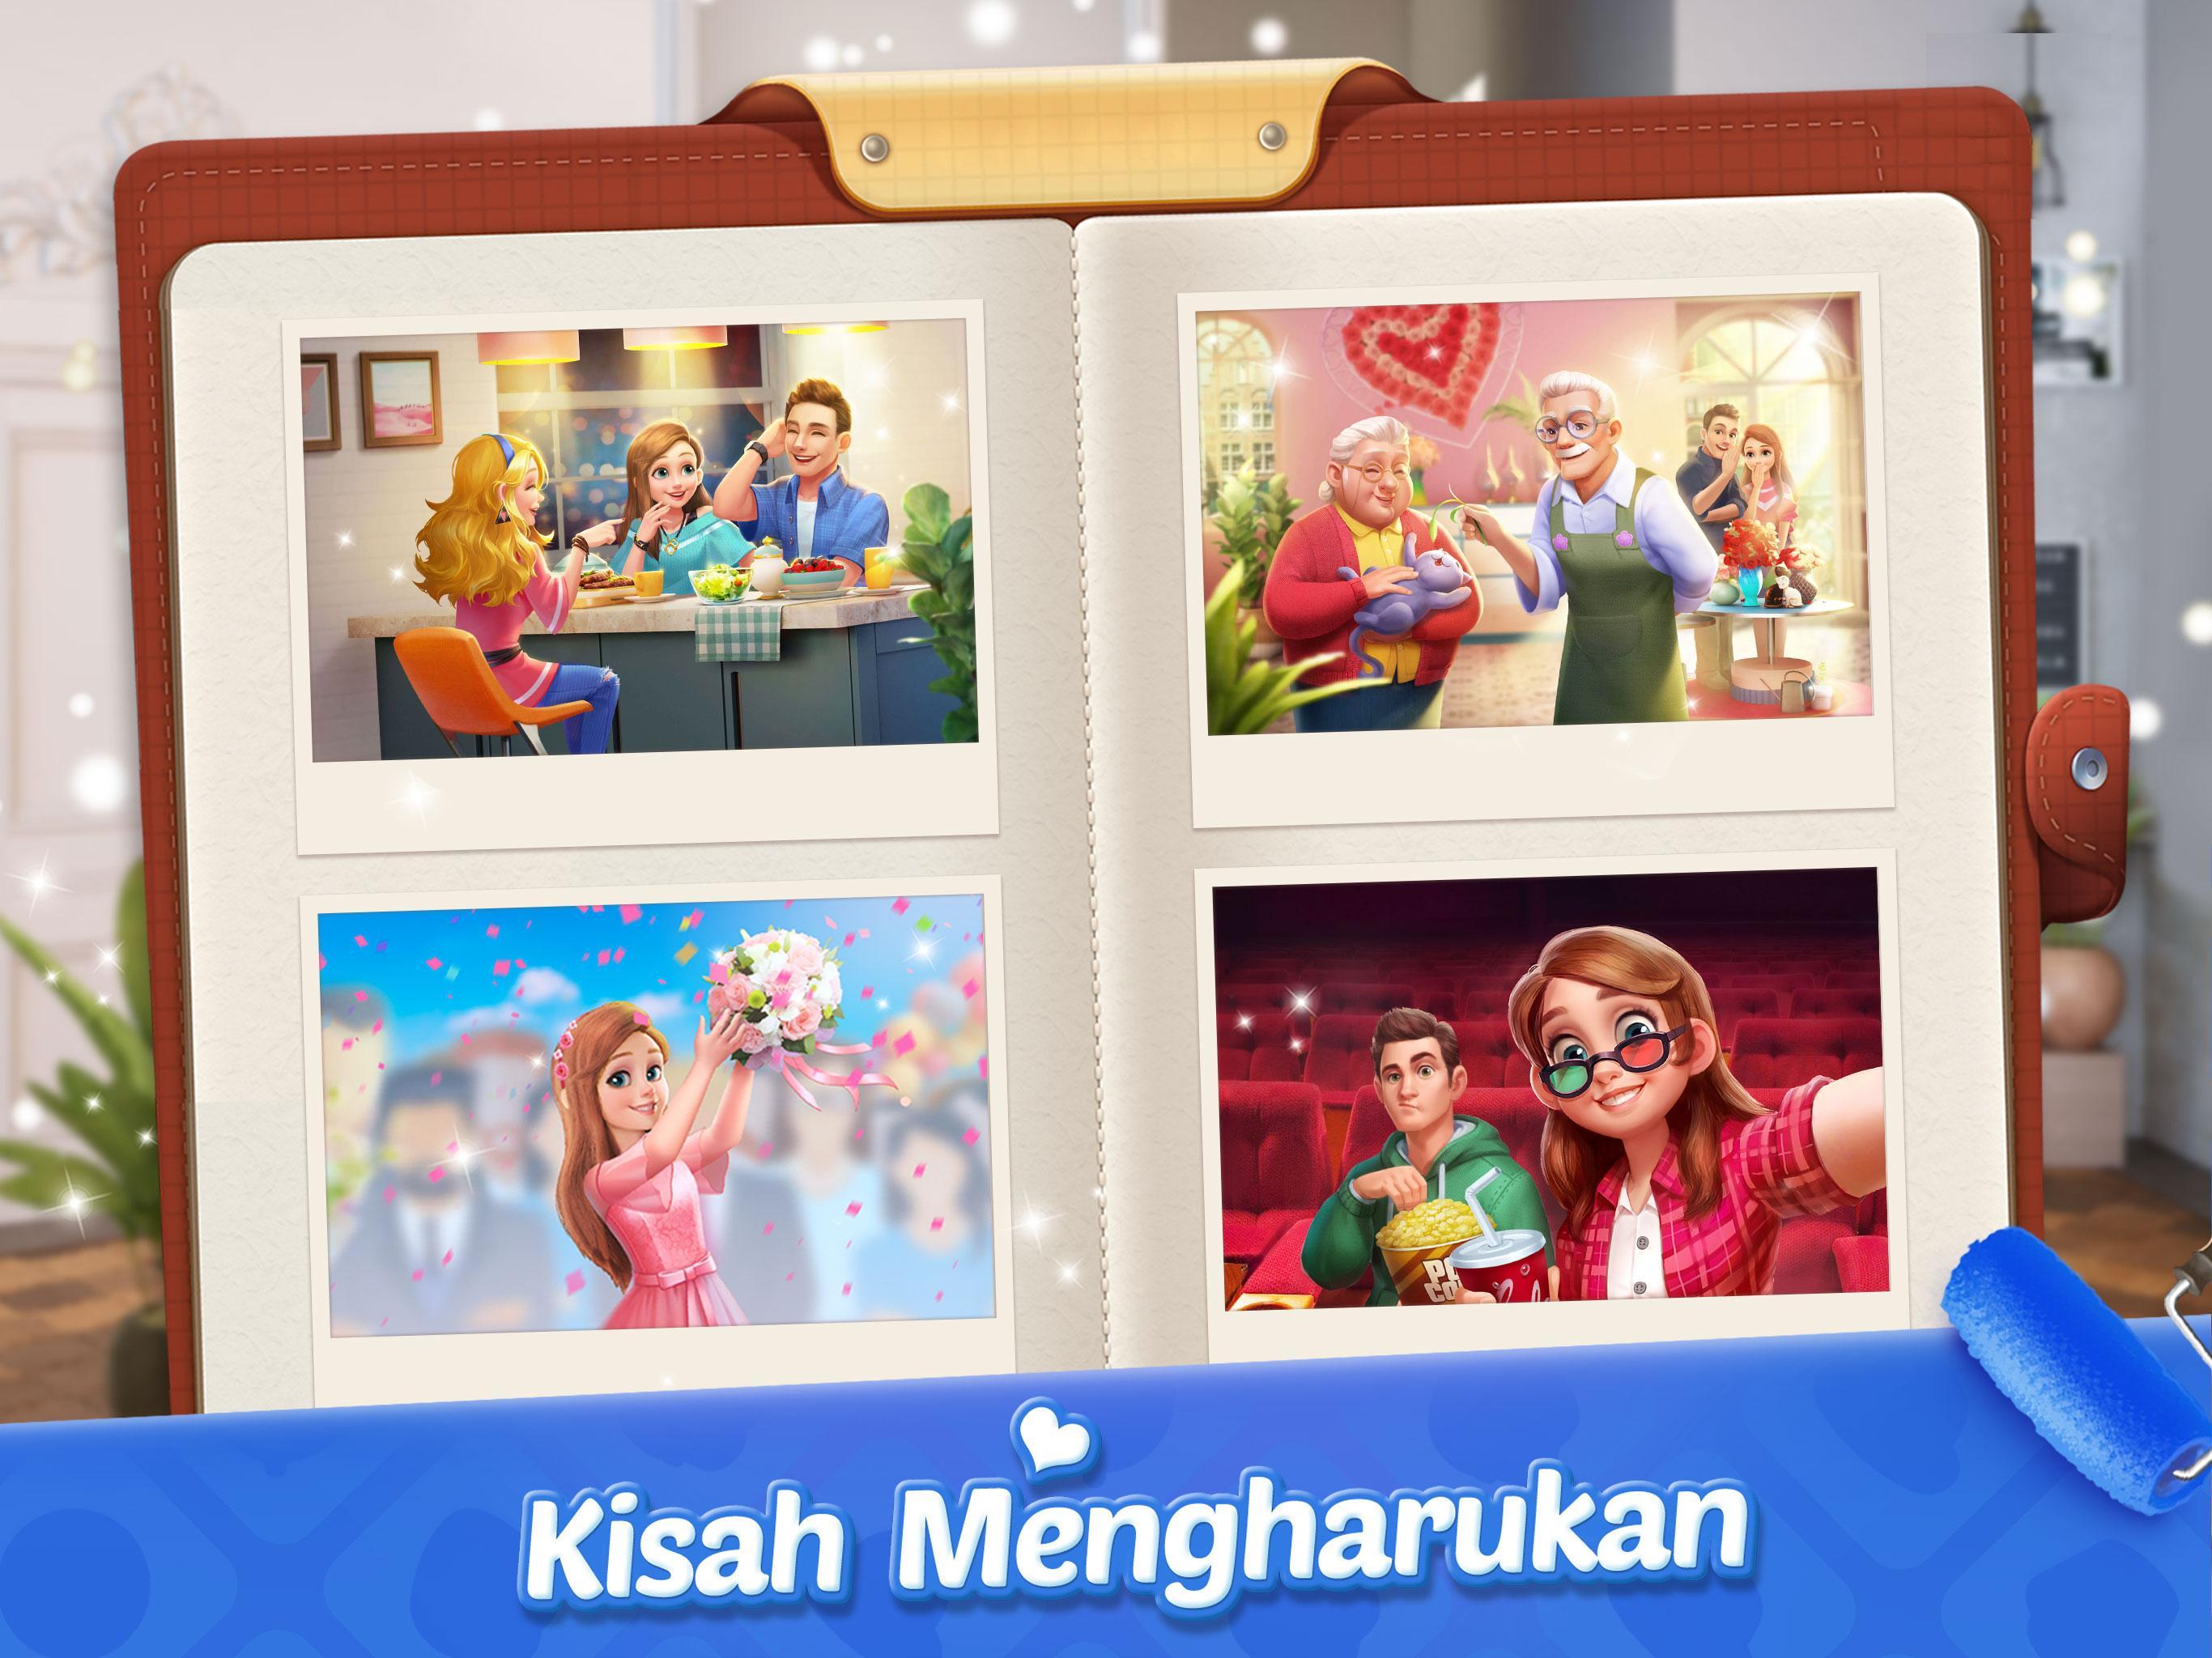 Rumahku For Android Apk Download